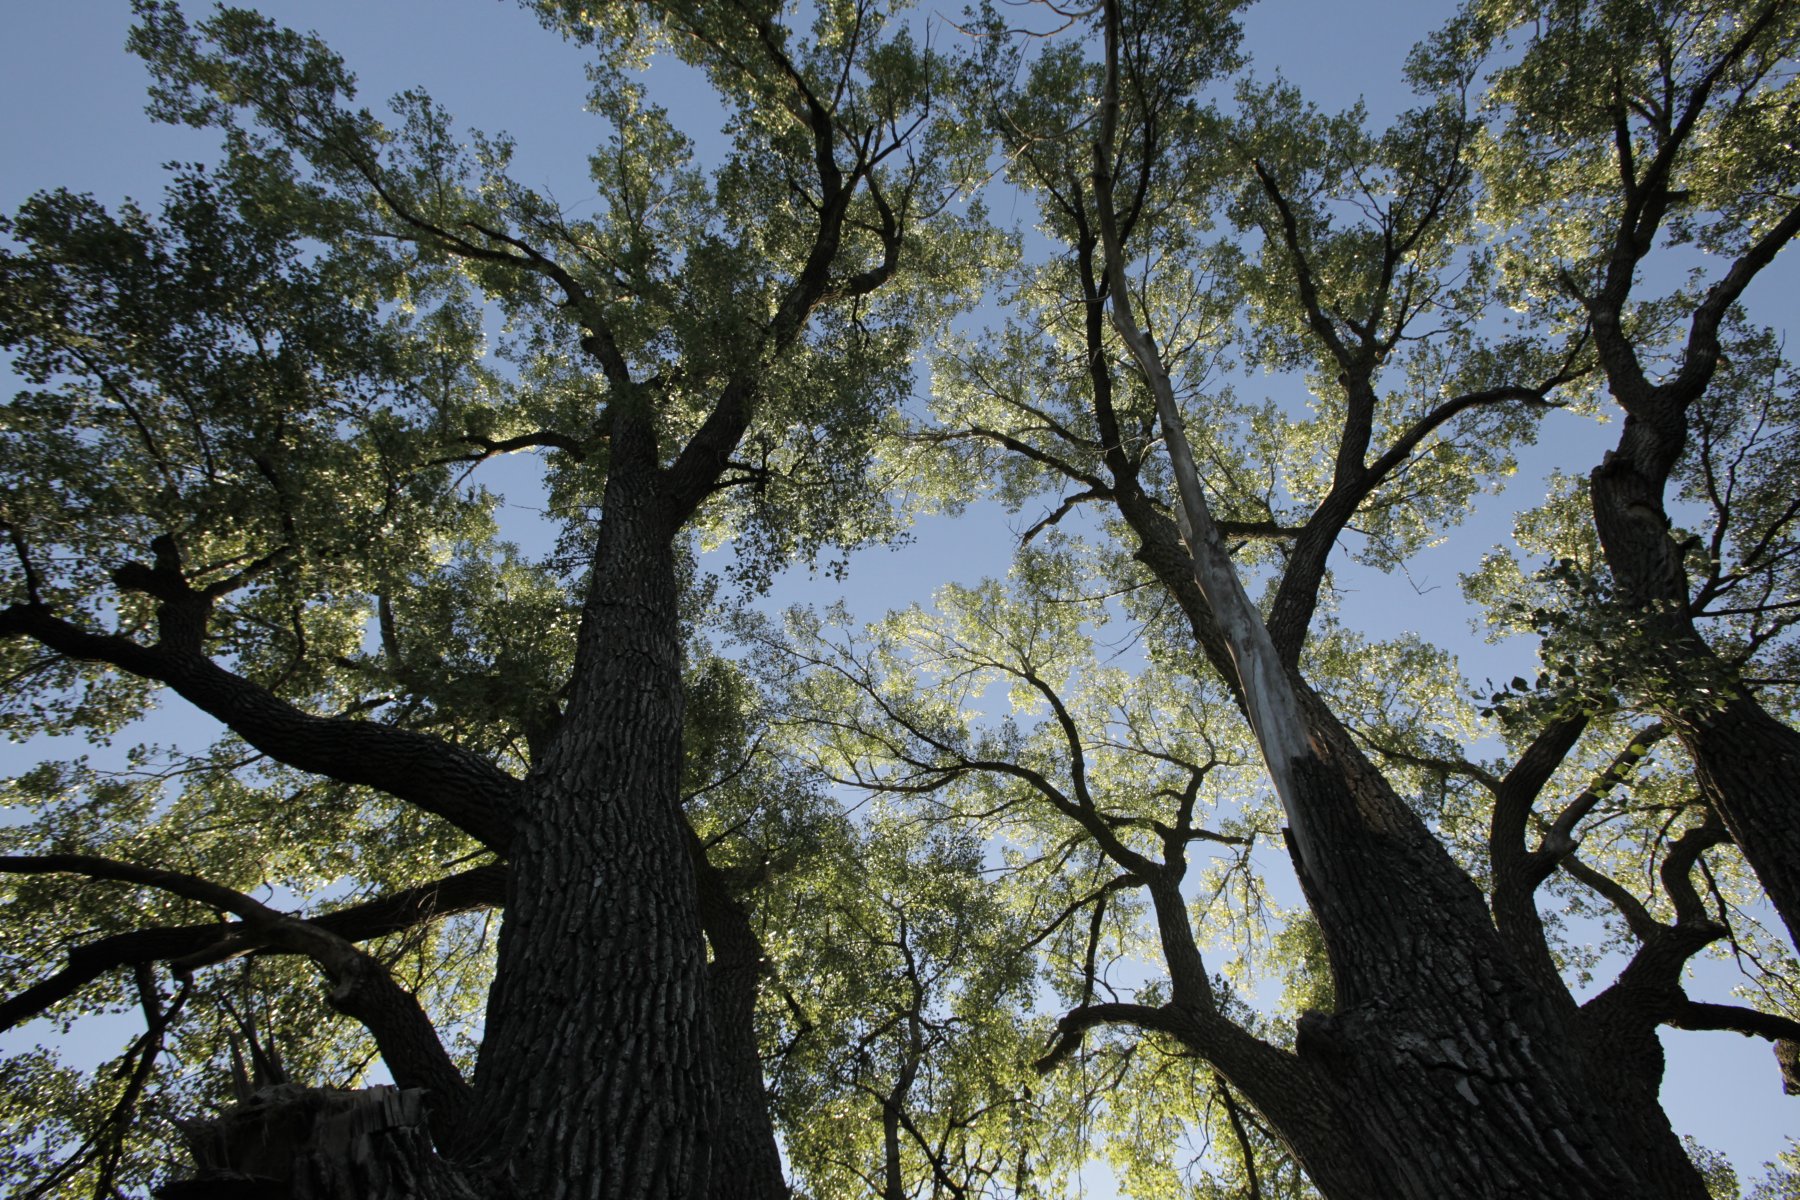 Looking up at the canopy of a large tree.